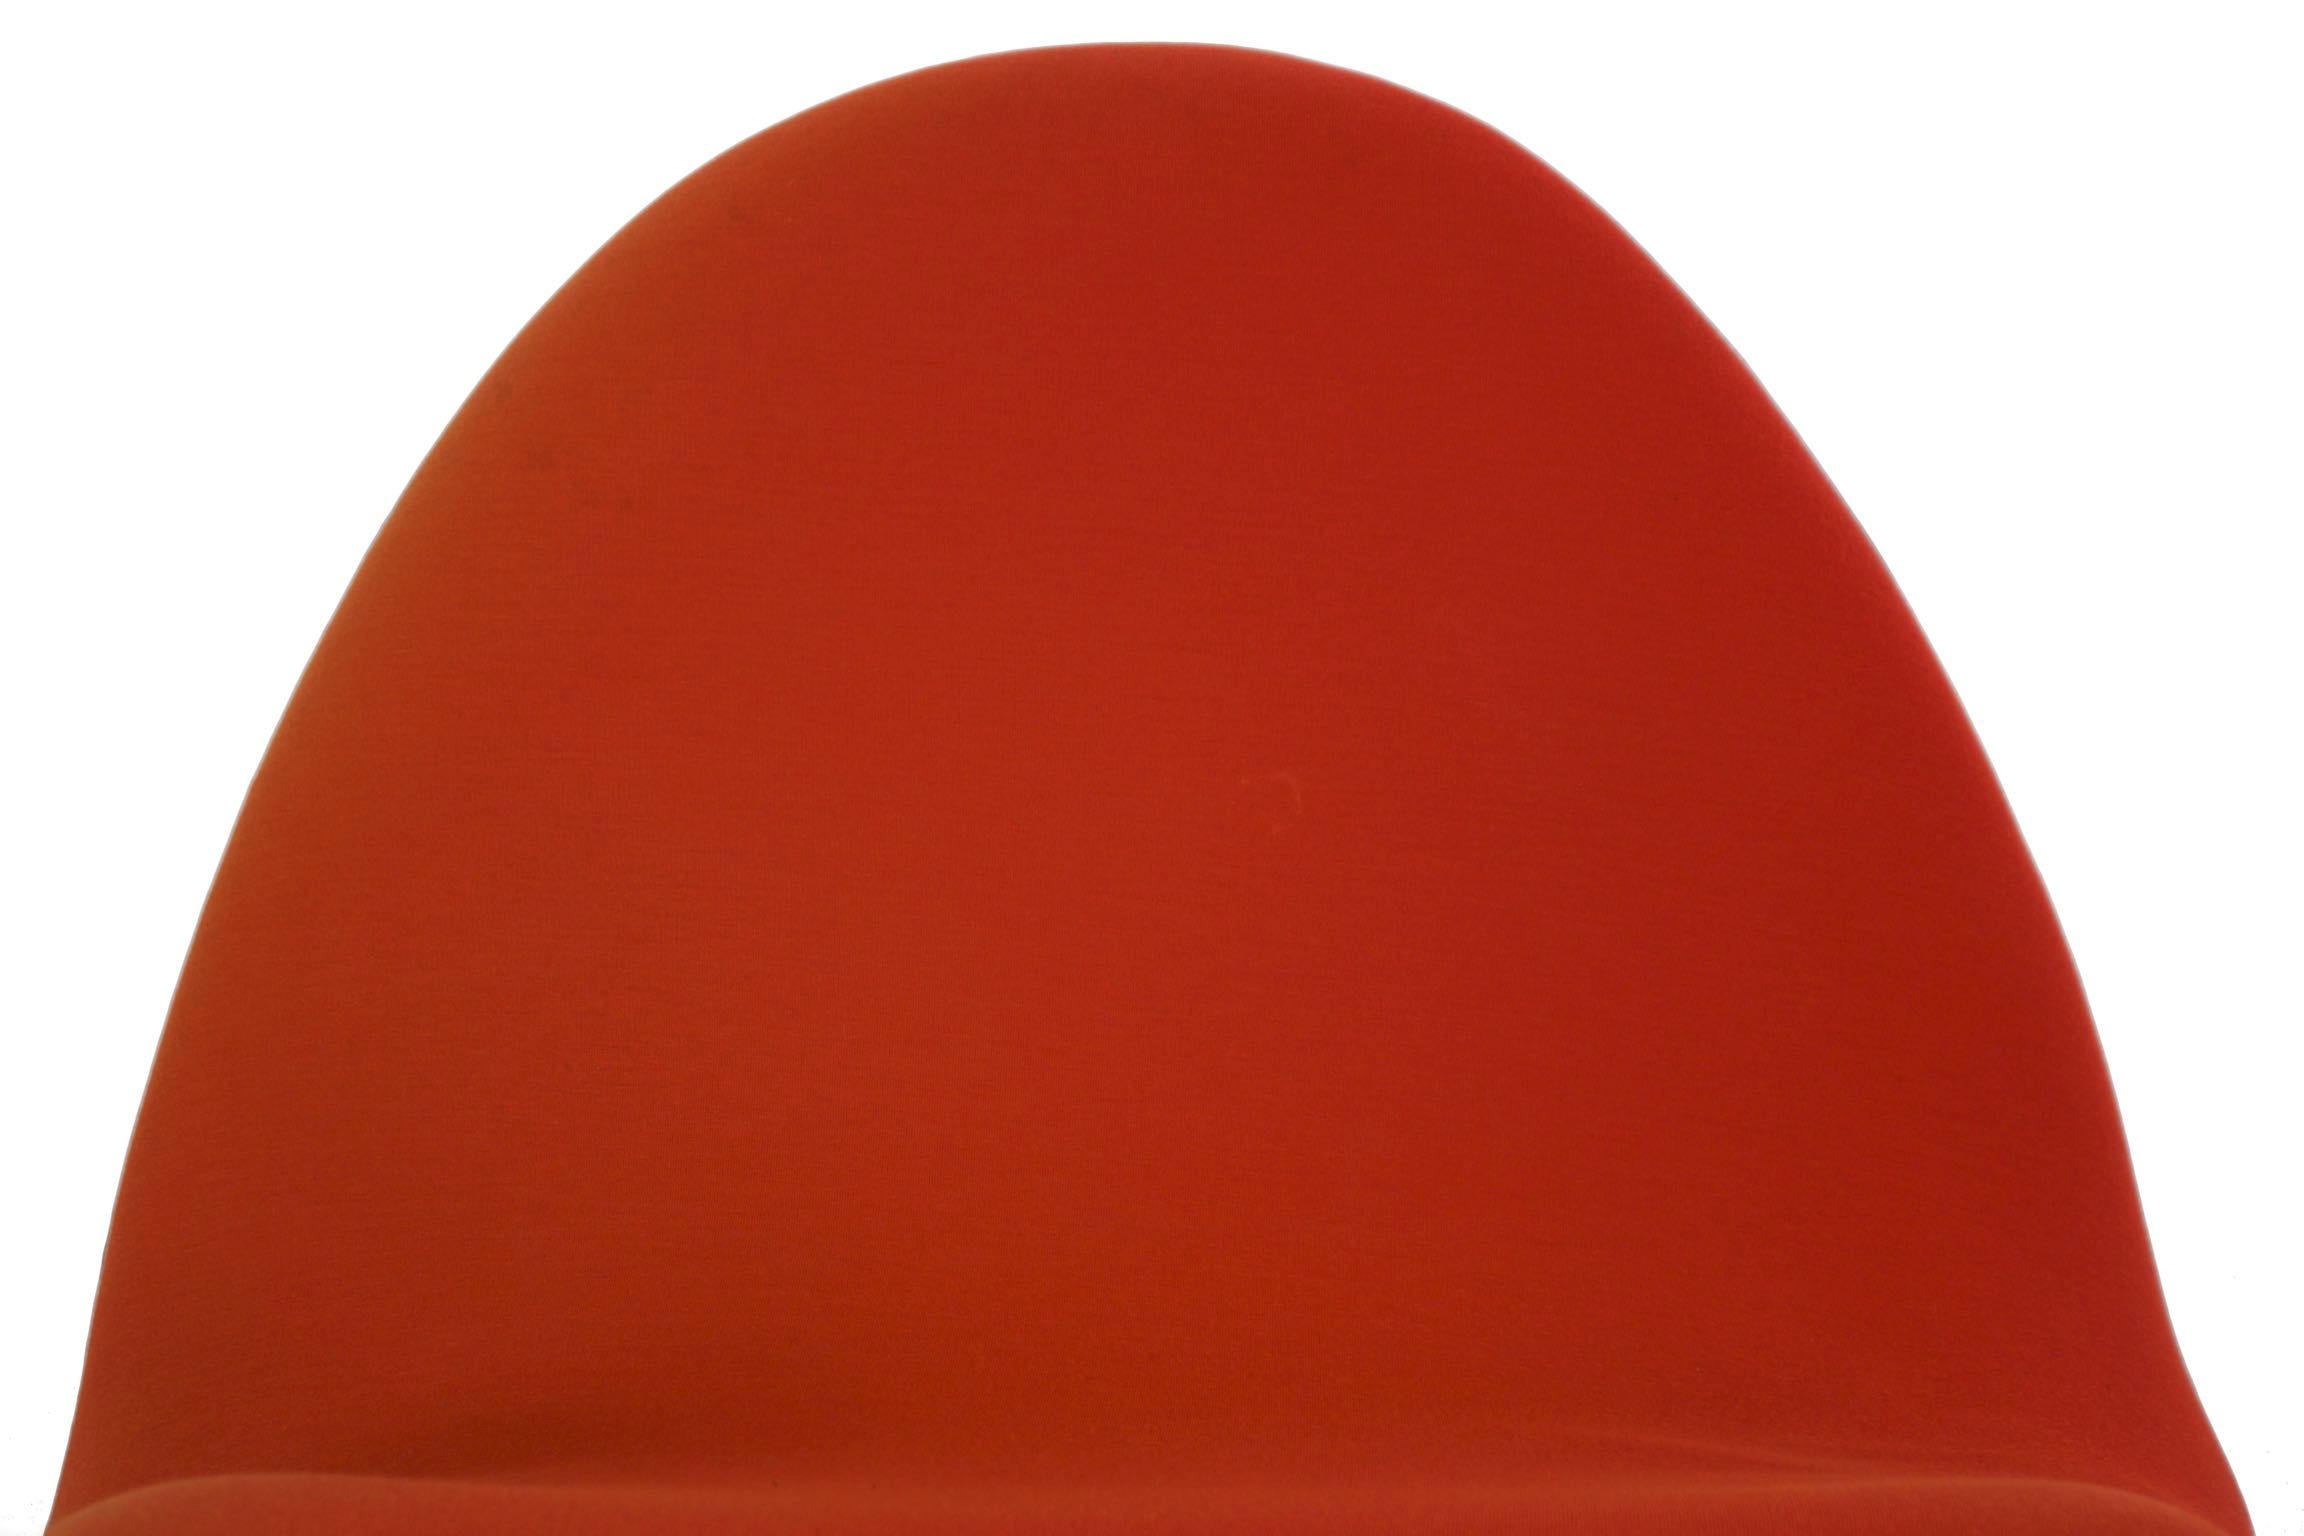 French Vintage Mid-Century Modern “Tongue” Chair by Pierre Paulin for Artifort